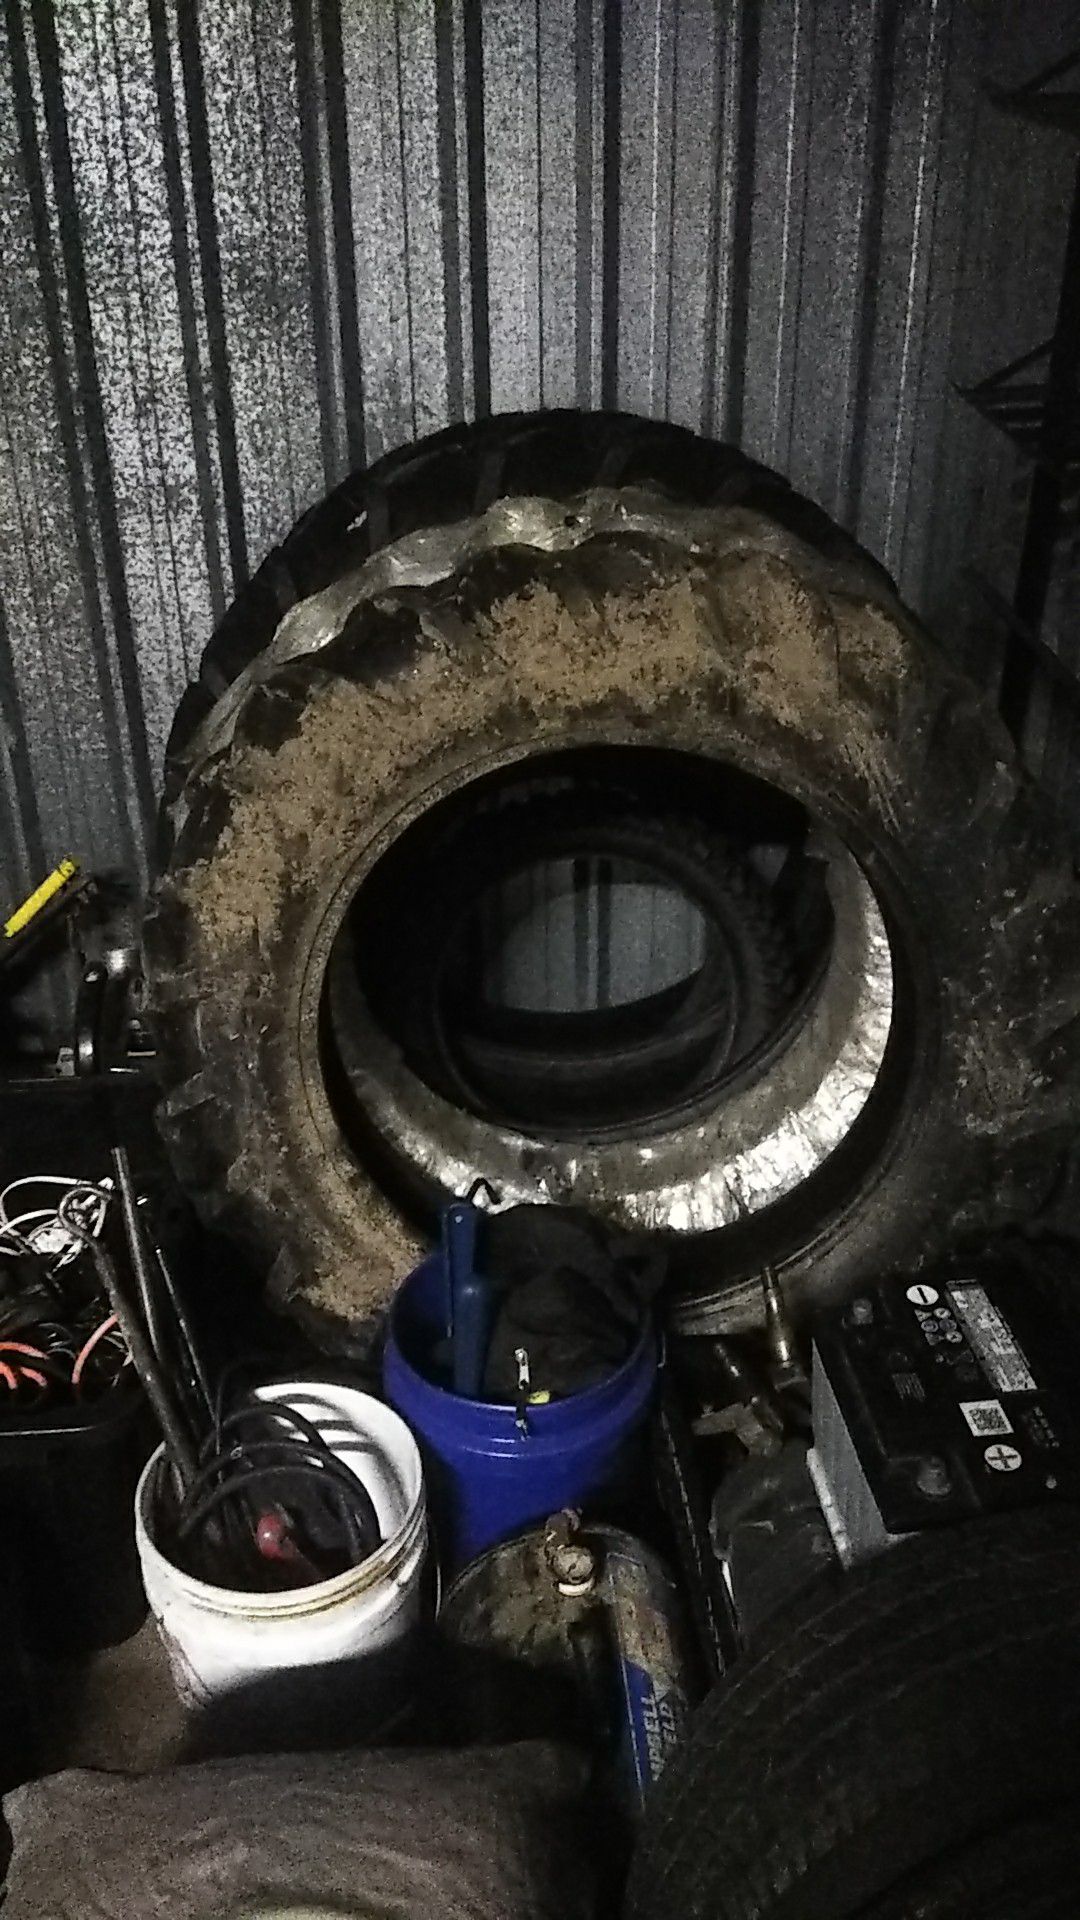 Large tractor tires